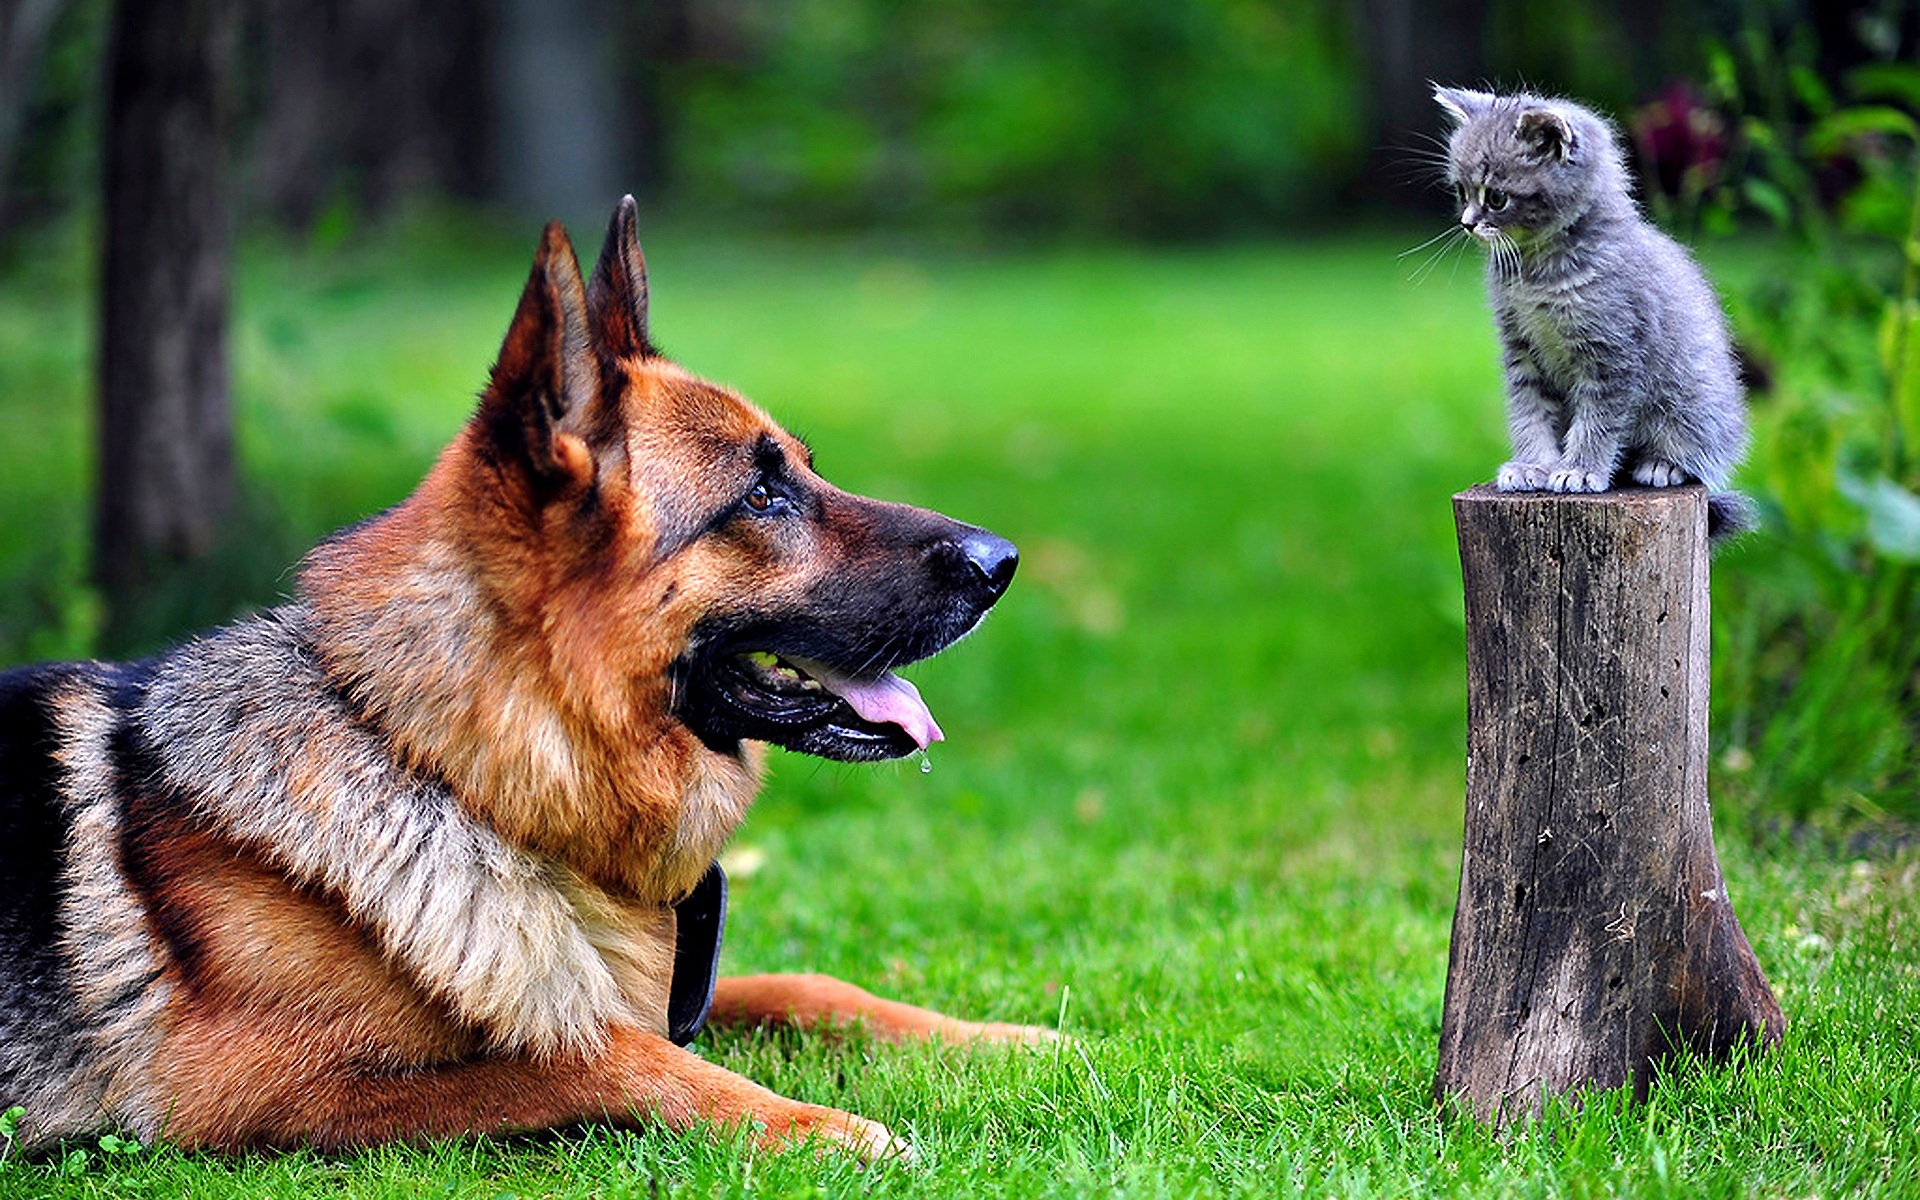 12 Reasons German Shepherds Are The Best-Looking Dogs In The World